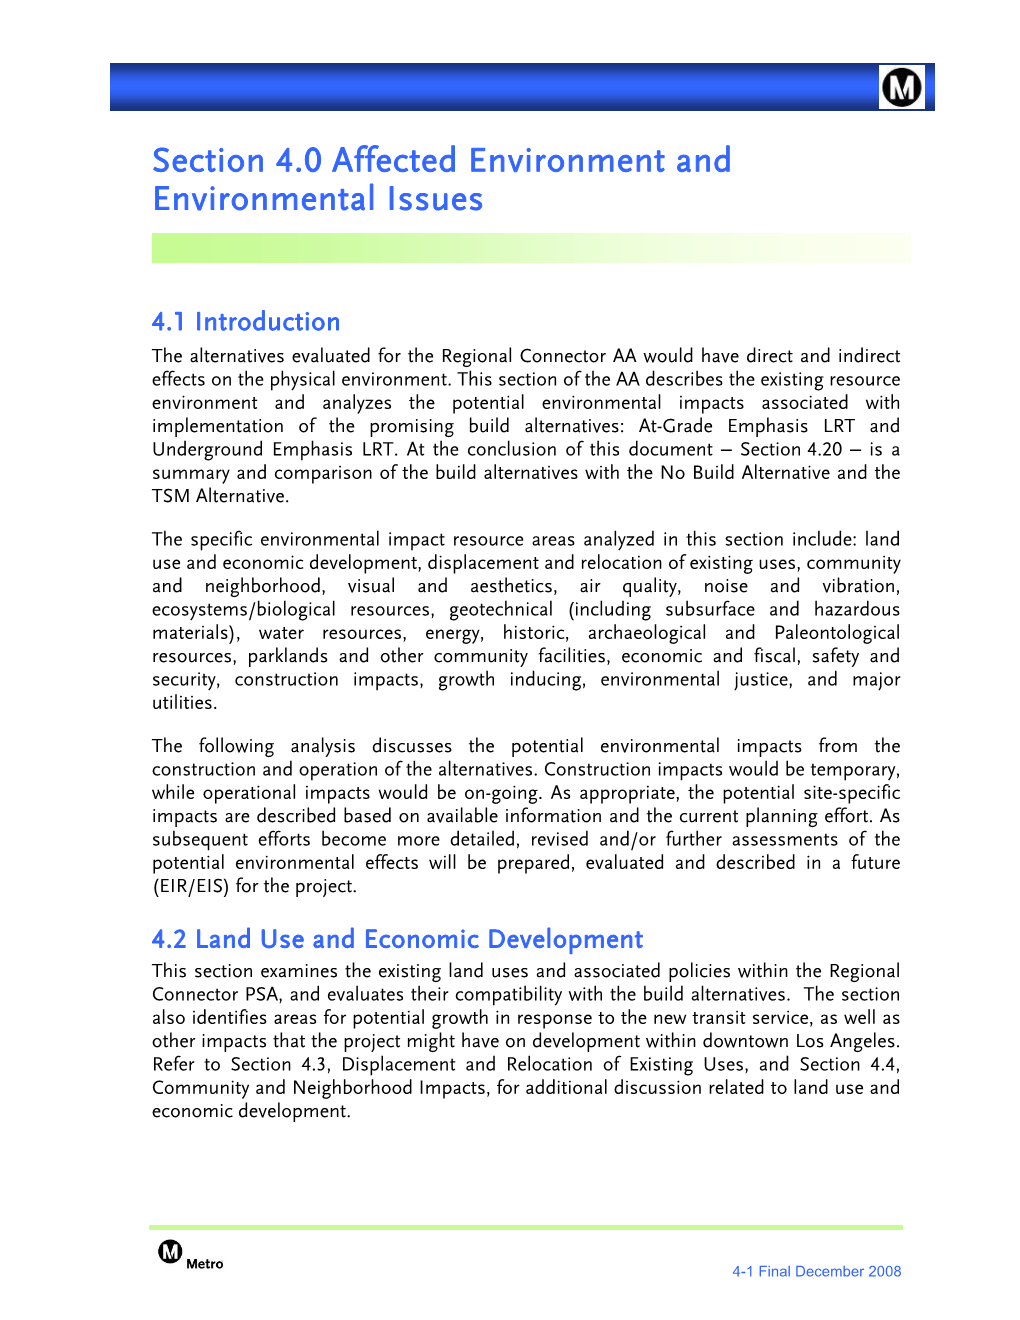 Section 4.0 Affected Environment and Environmental Issues